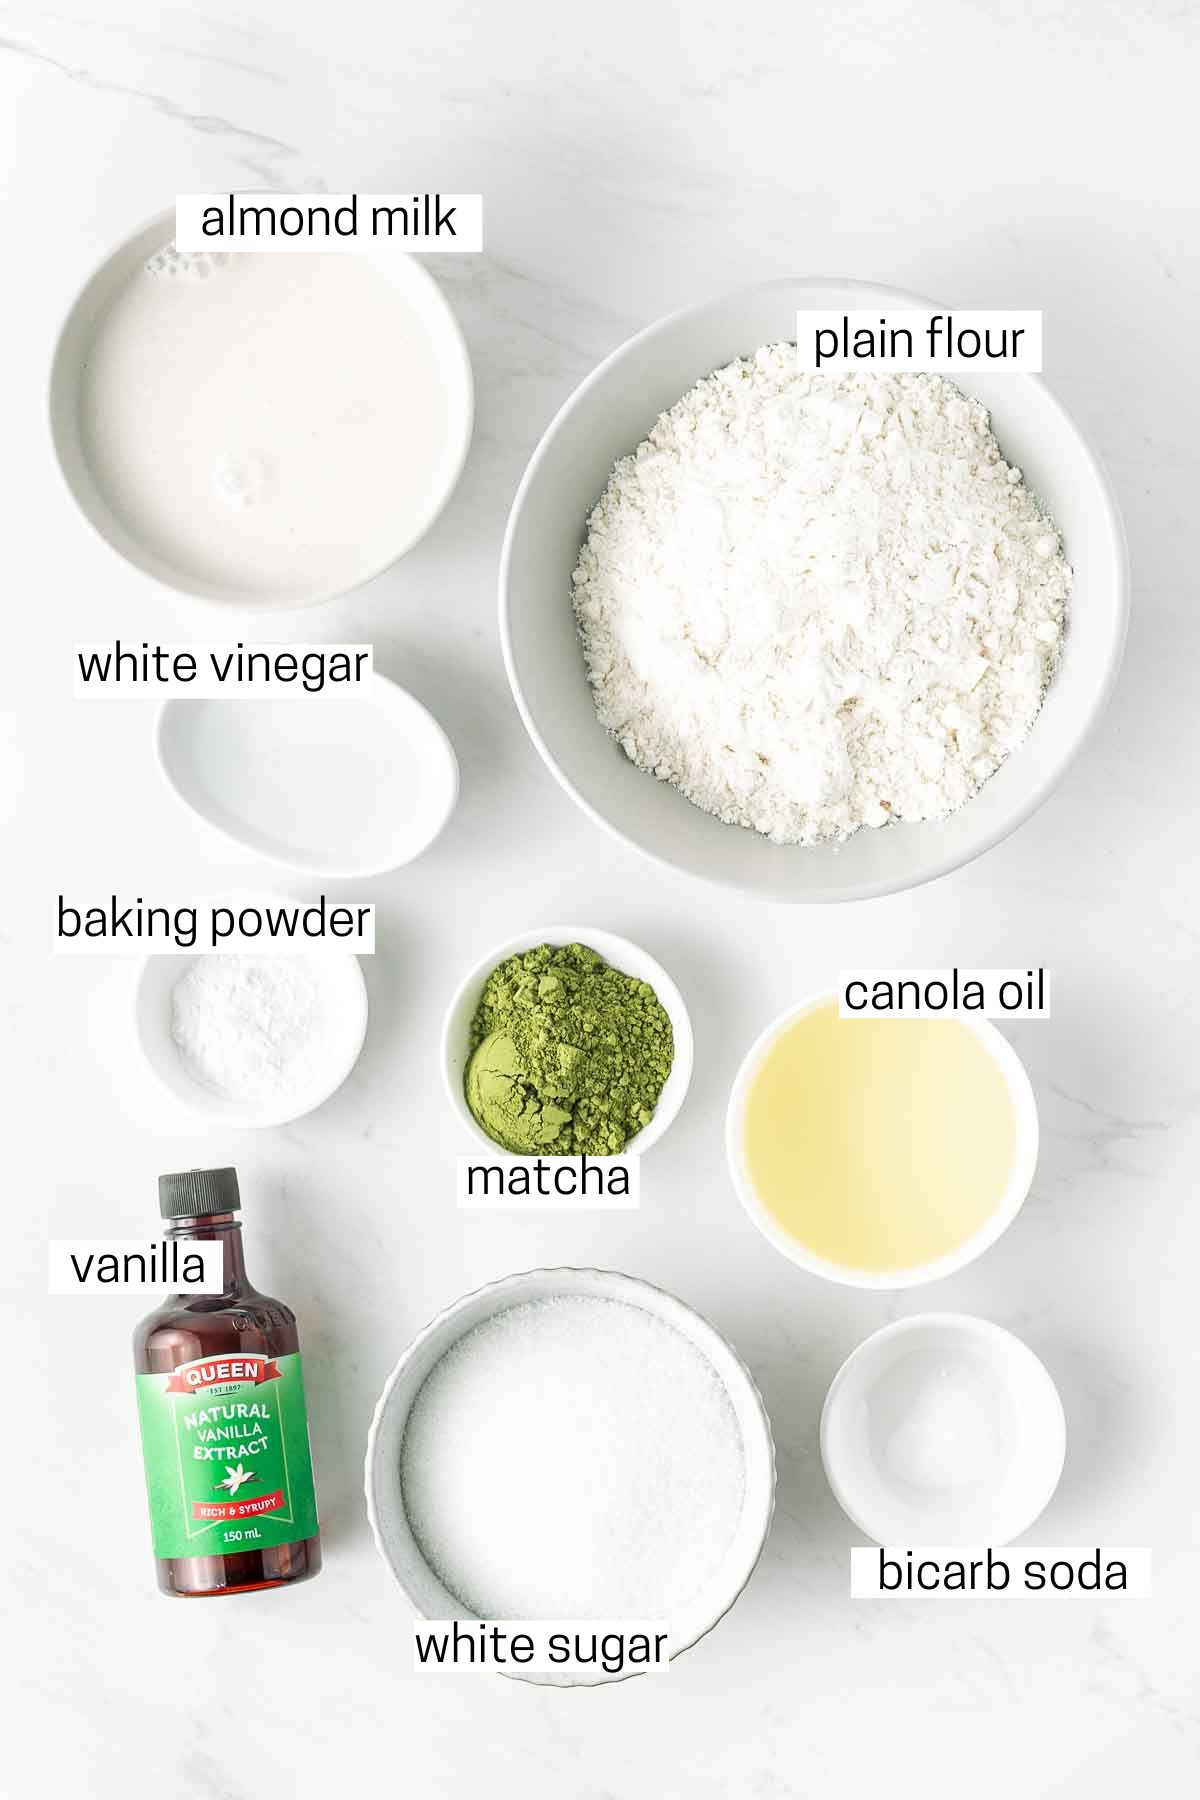 All ingredients needed for the vegan matcha cupcakes laid out in small bowls.